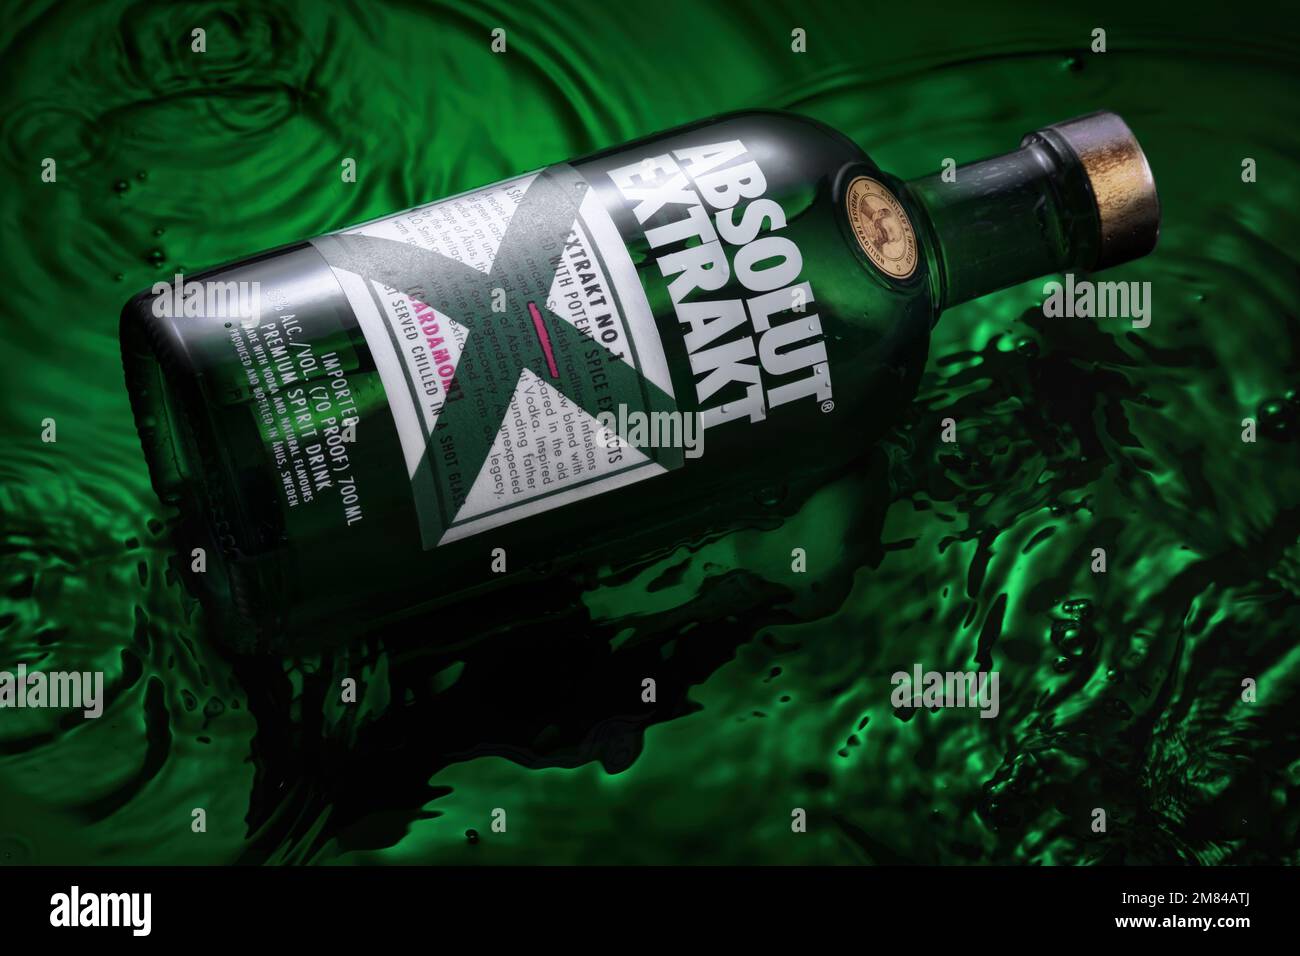 Bottle of Original Absolut Extrakt in water on a green background. Stock Photo